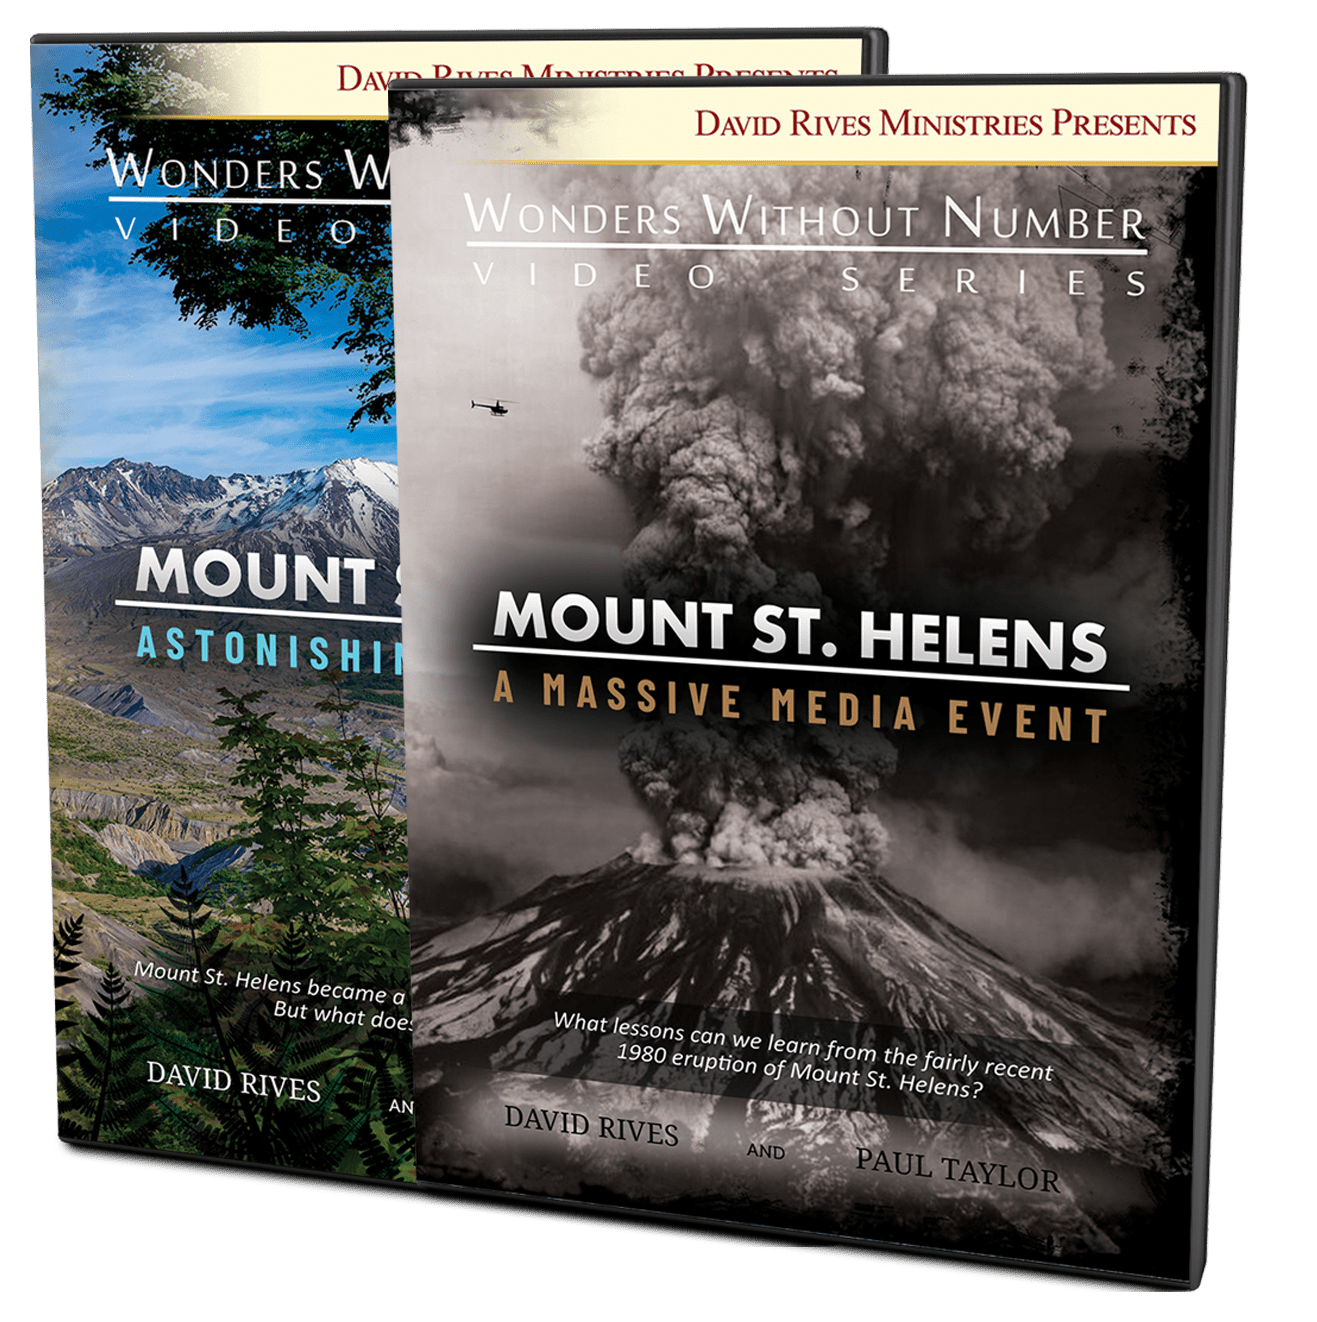 Mount St. Helens - Ruin and Regrowth 2 Video Bundle